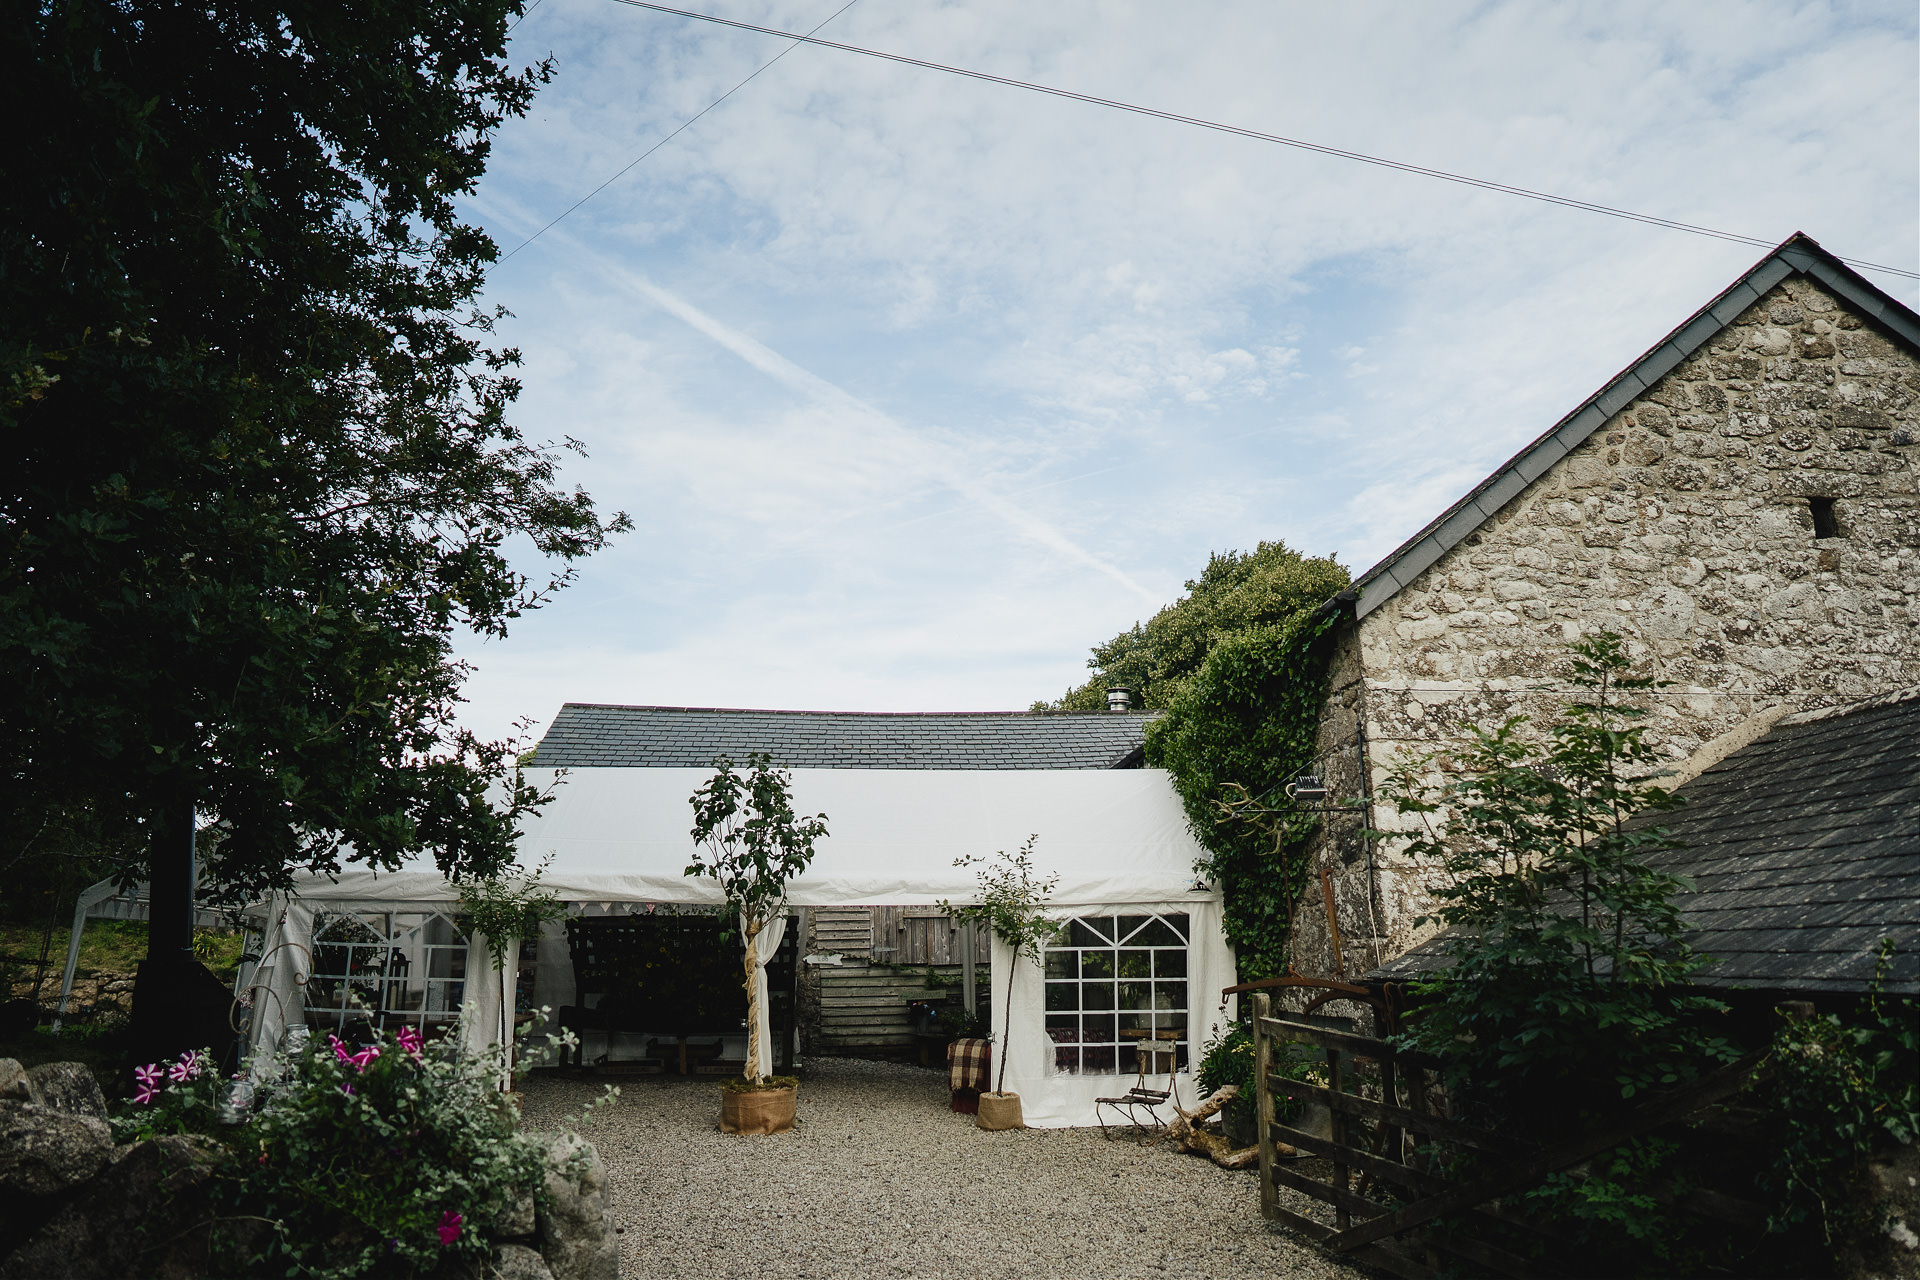 Exterior view of a beautiful old barn with a wedding marquee attached